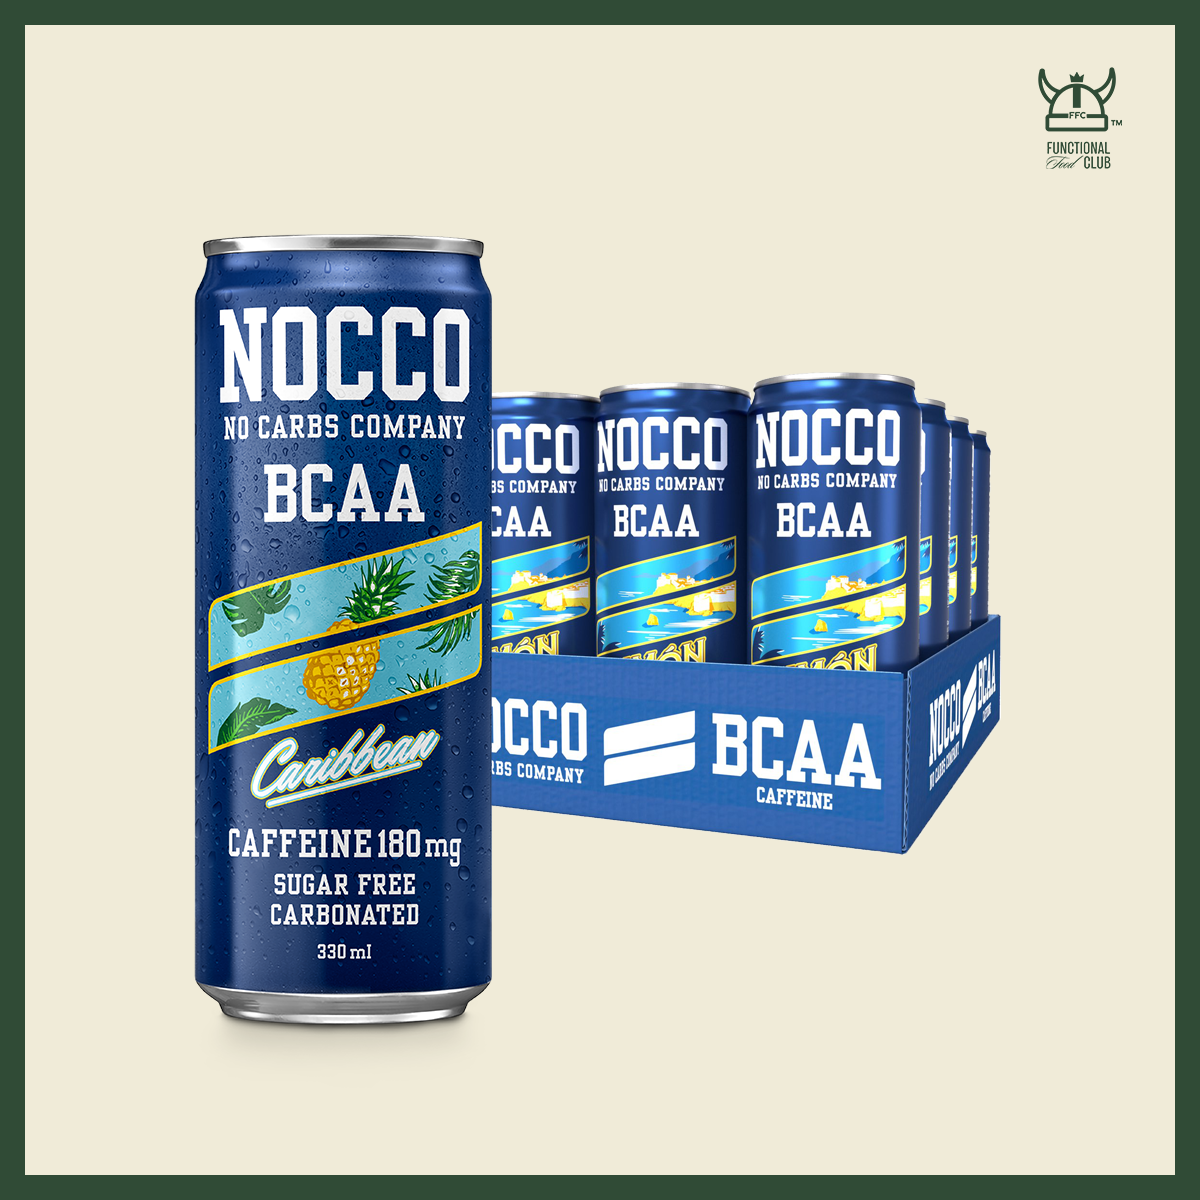 NOCCO BCAA Multi-vitamins Performance Drink- Caribbean (Caffeinated) 24 cans